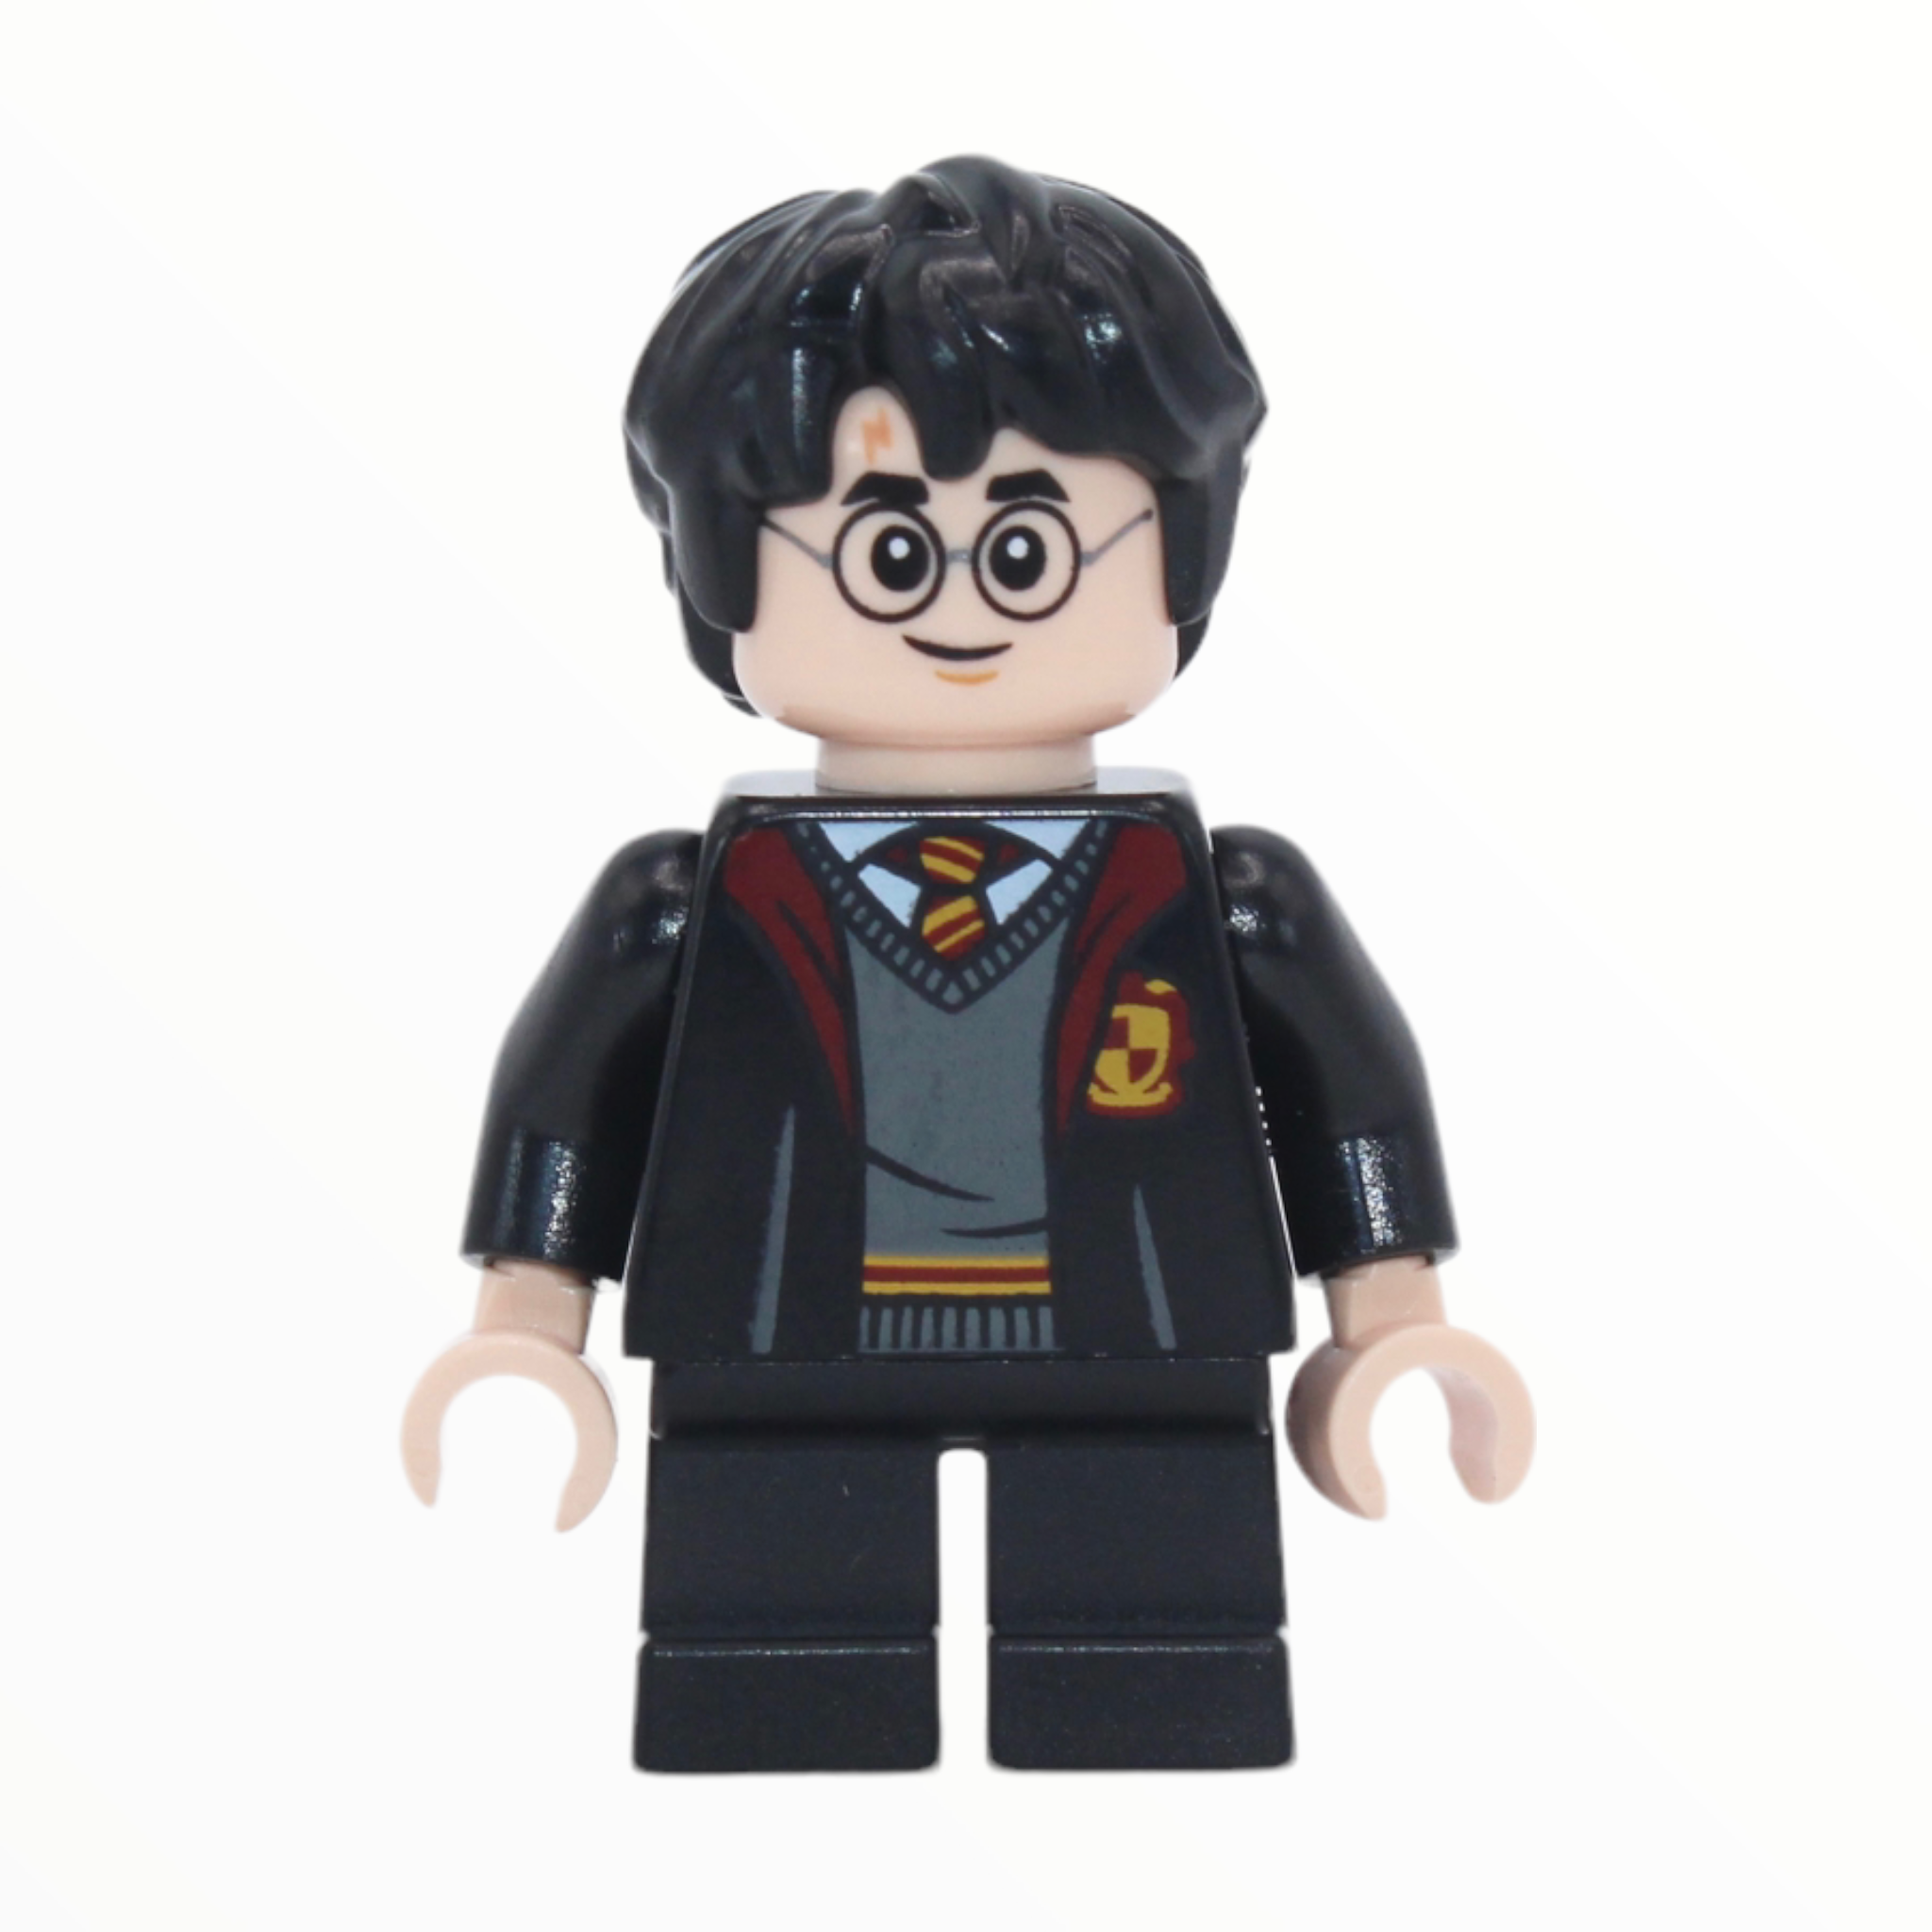 Harry Potter (Gryffindor robe open, sweater, shirt and tie, short legs, 2021)